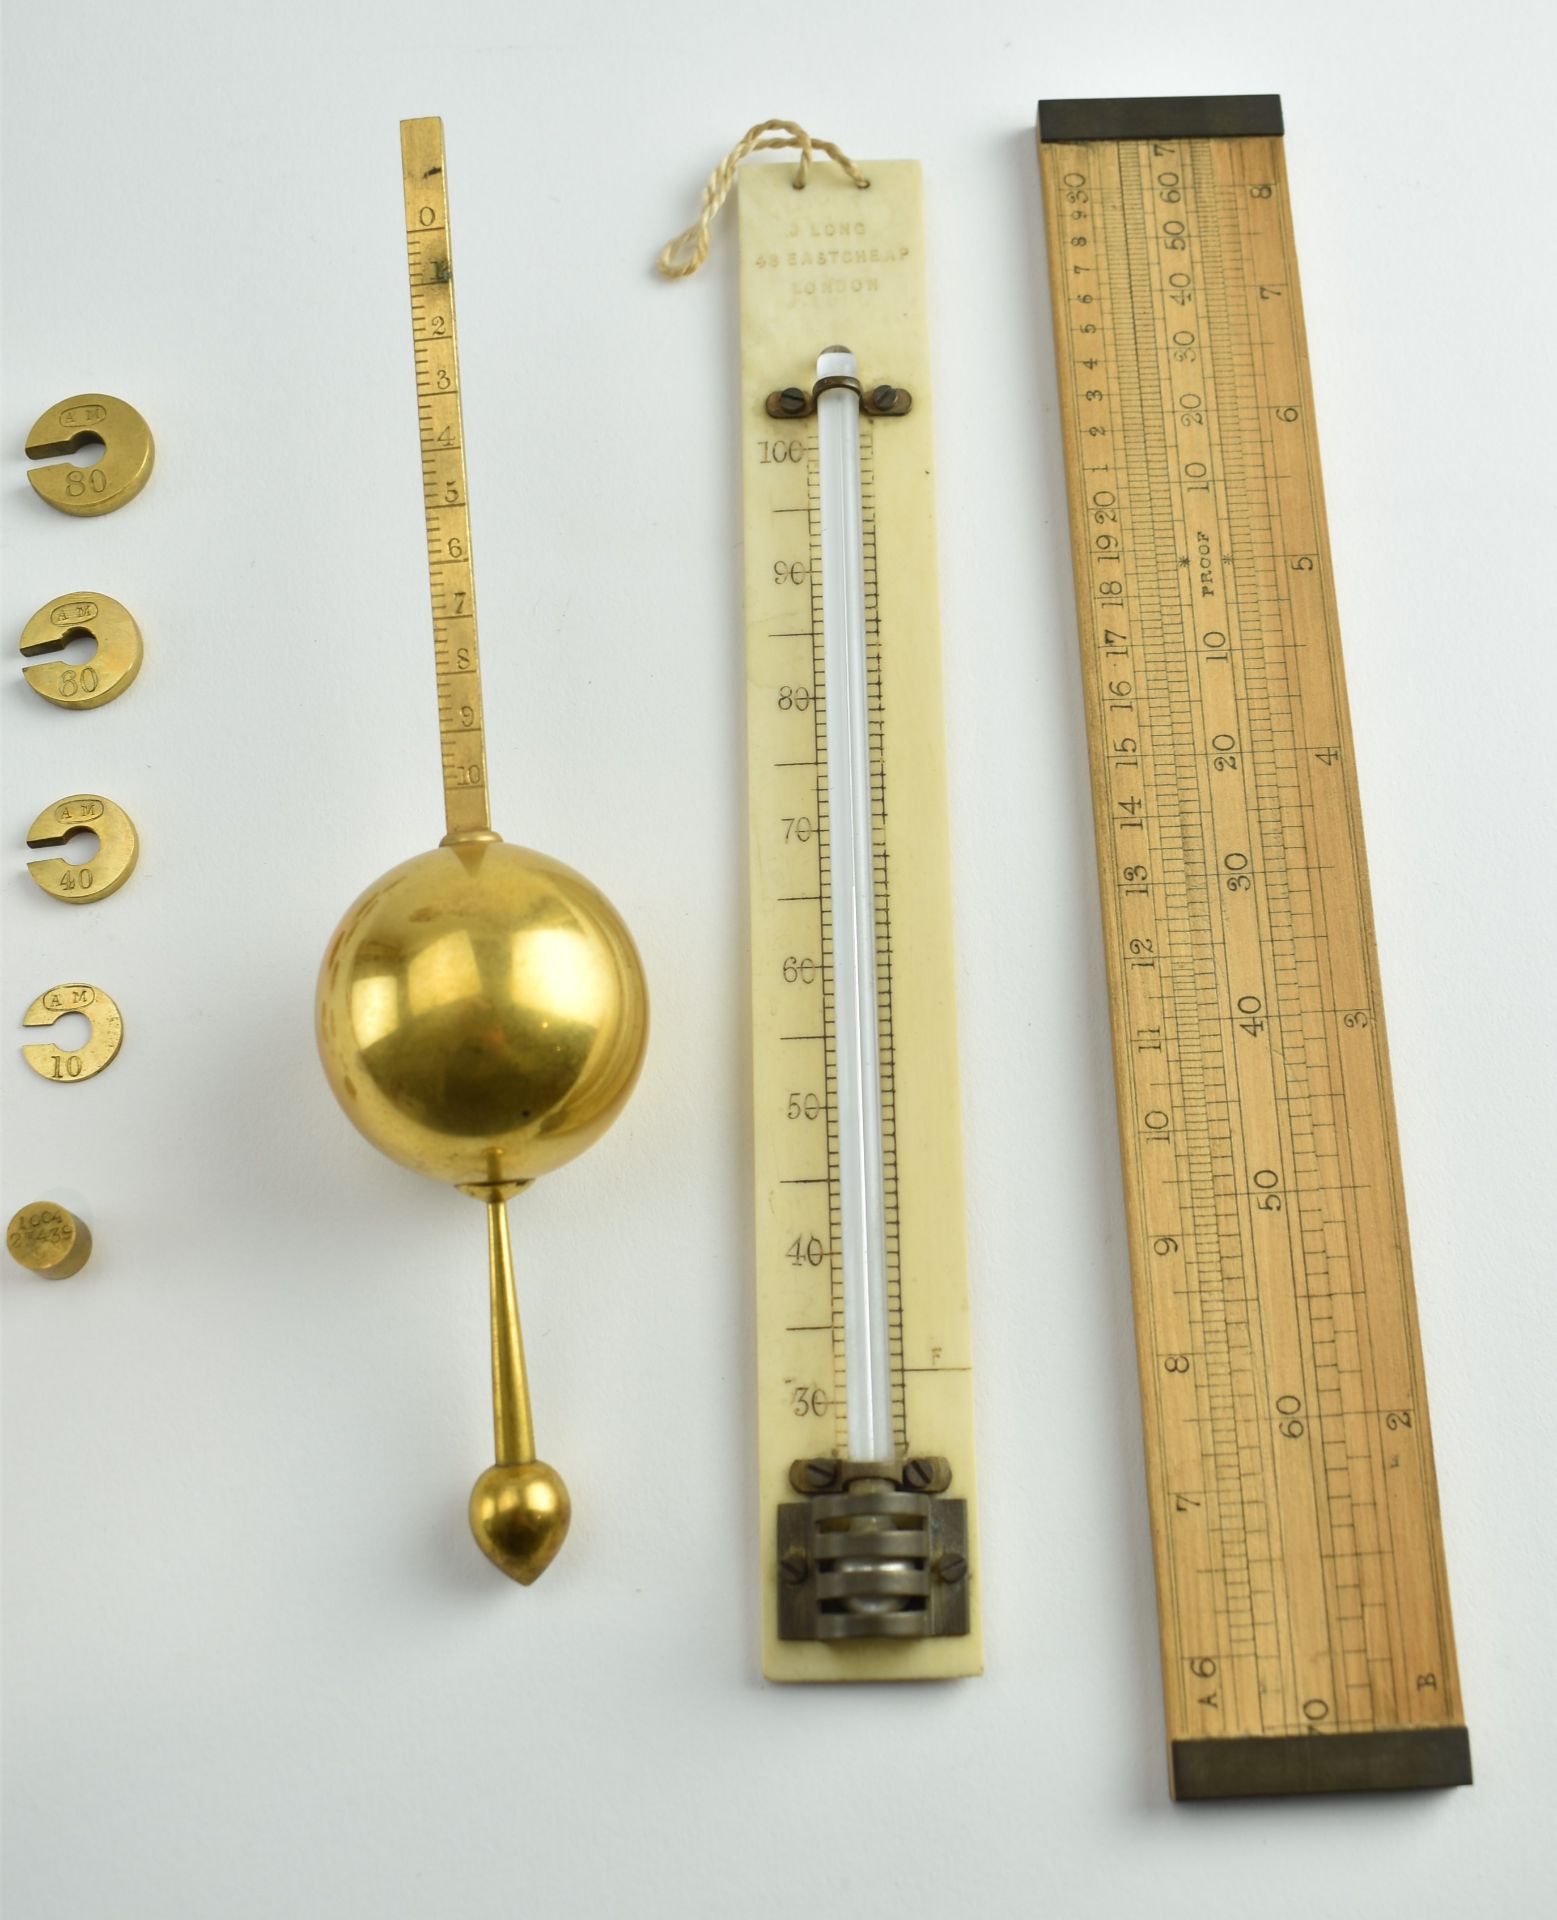 1920S SIKES HYDROMETER BY T. O. BLAKE - ASTON & MANDER LONDON - Image 10 of 12